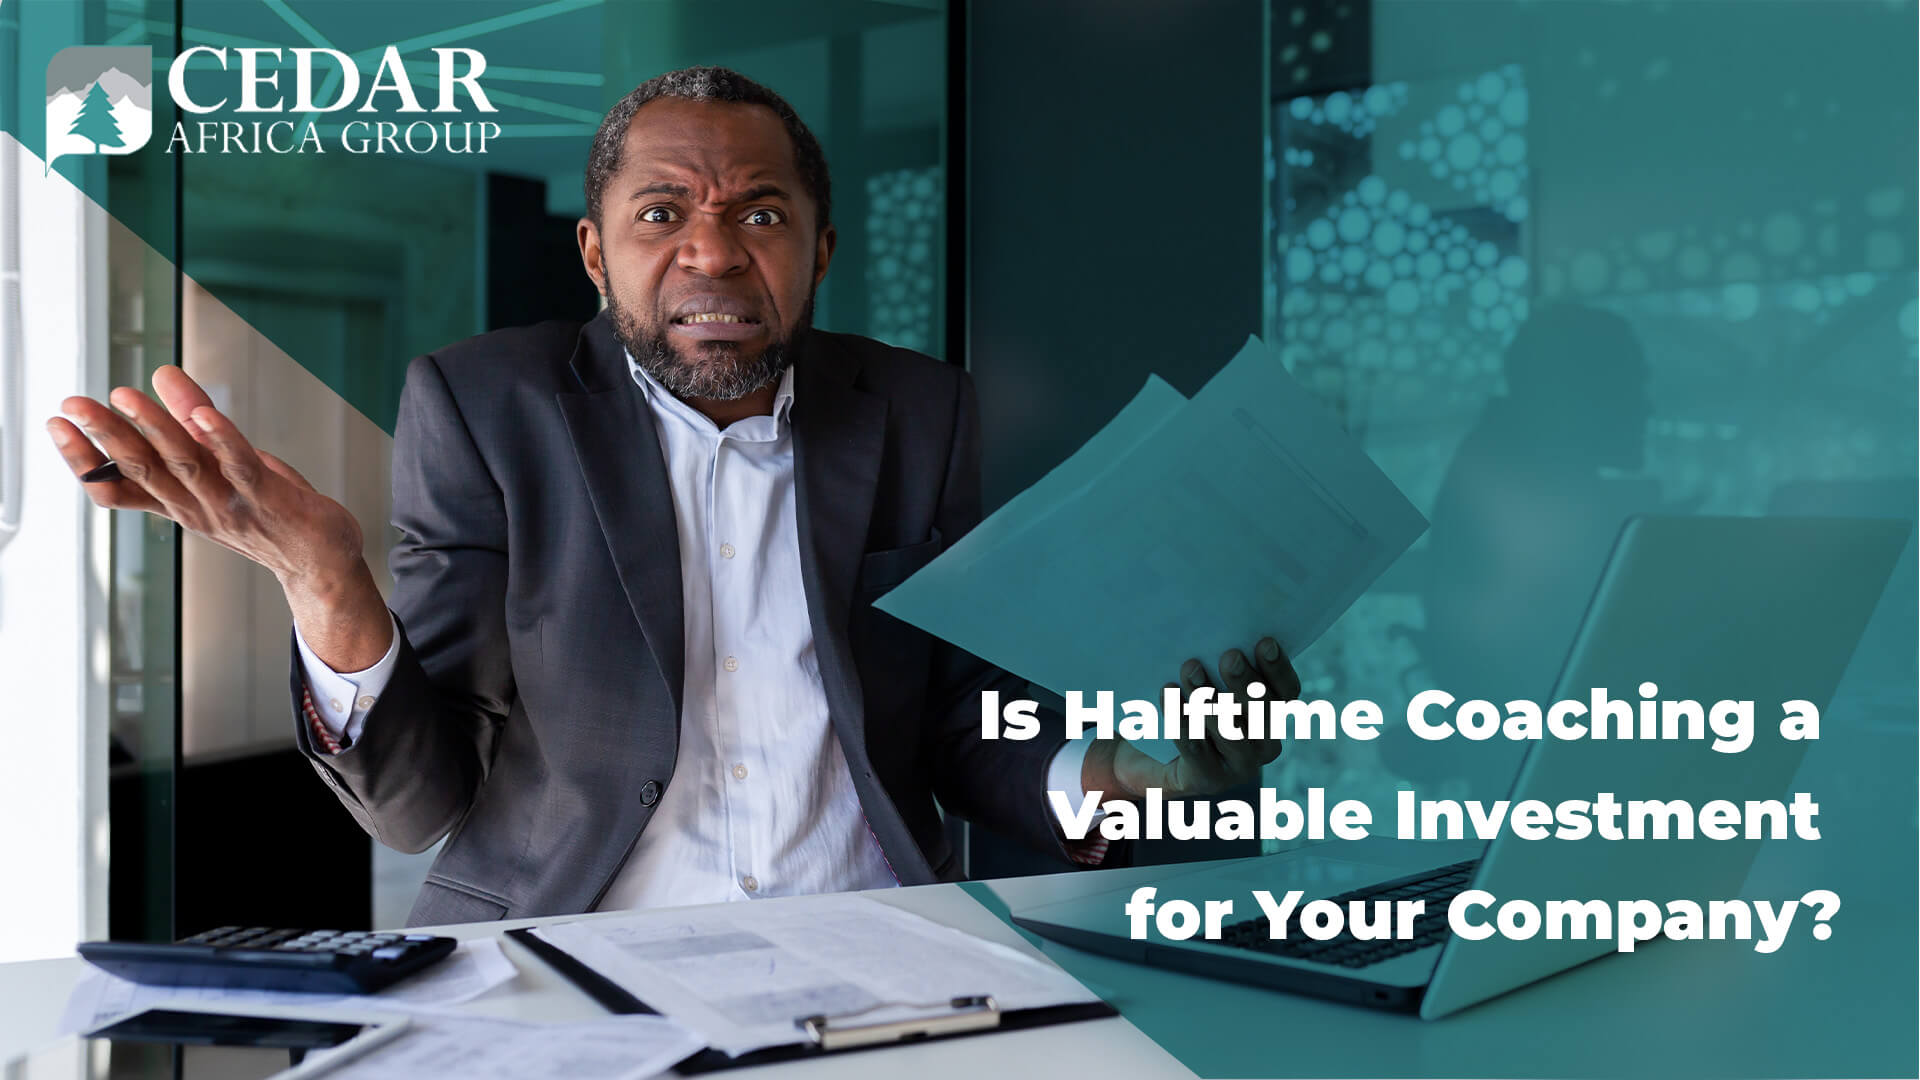 Is halftime coaching a valuable investment for your company